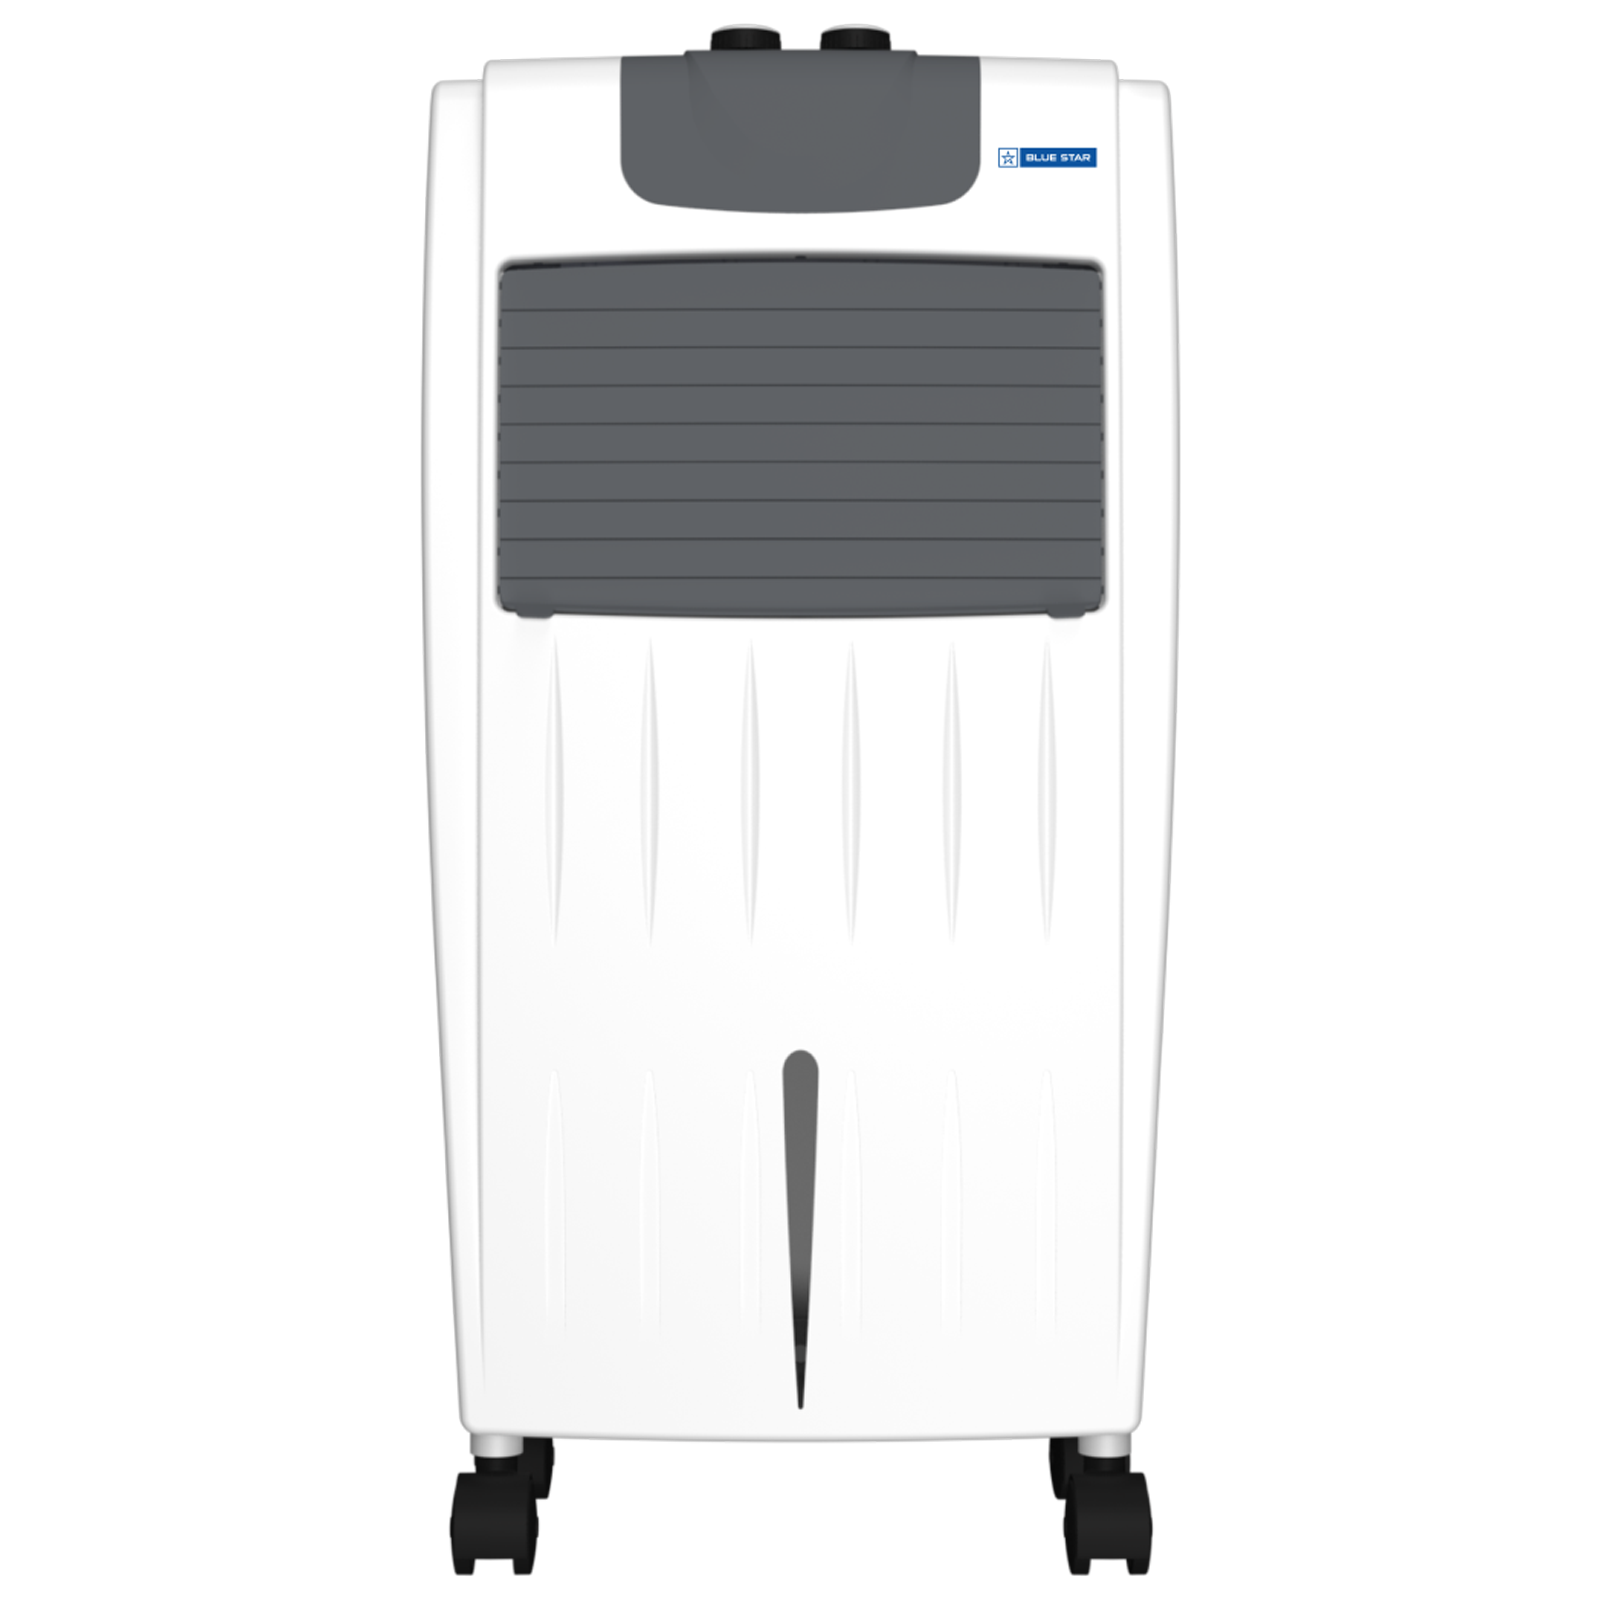 Blue Star ASTRA 20 Litres Personal Air Cooler with Anti-Microbial Property (Cross Drift Technology, White & Dark Grey)